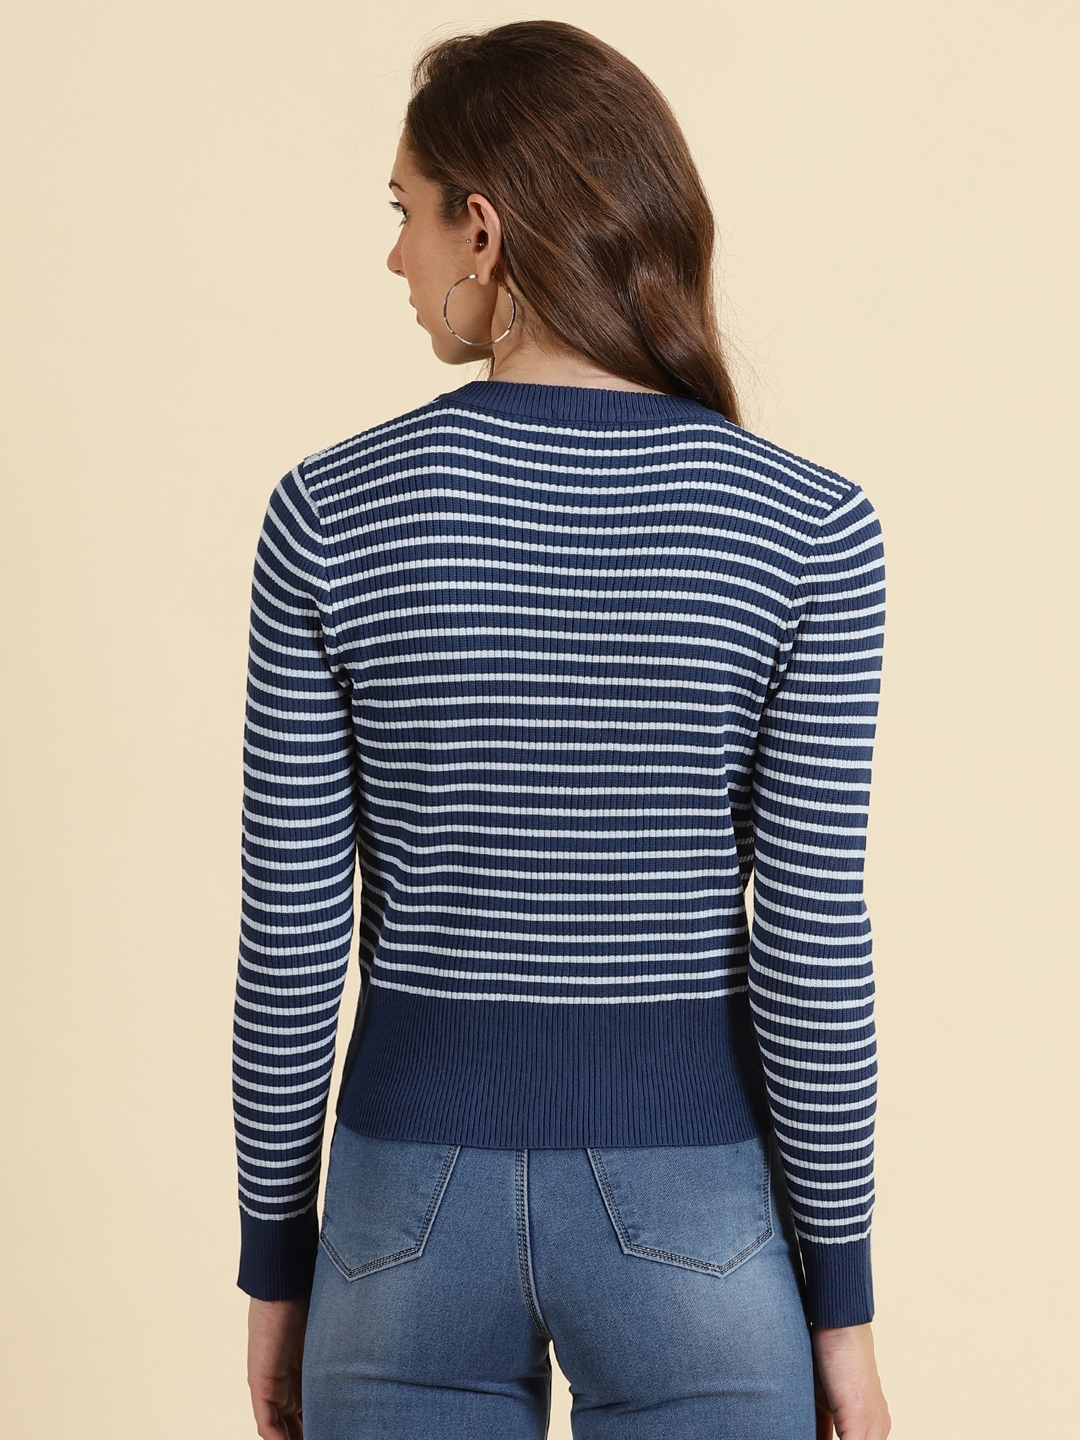 Showoff | SHOWOFF Women's High Neck Striped NavyBlue Fitted Regular Top 3